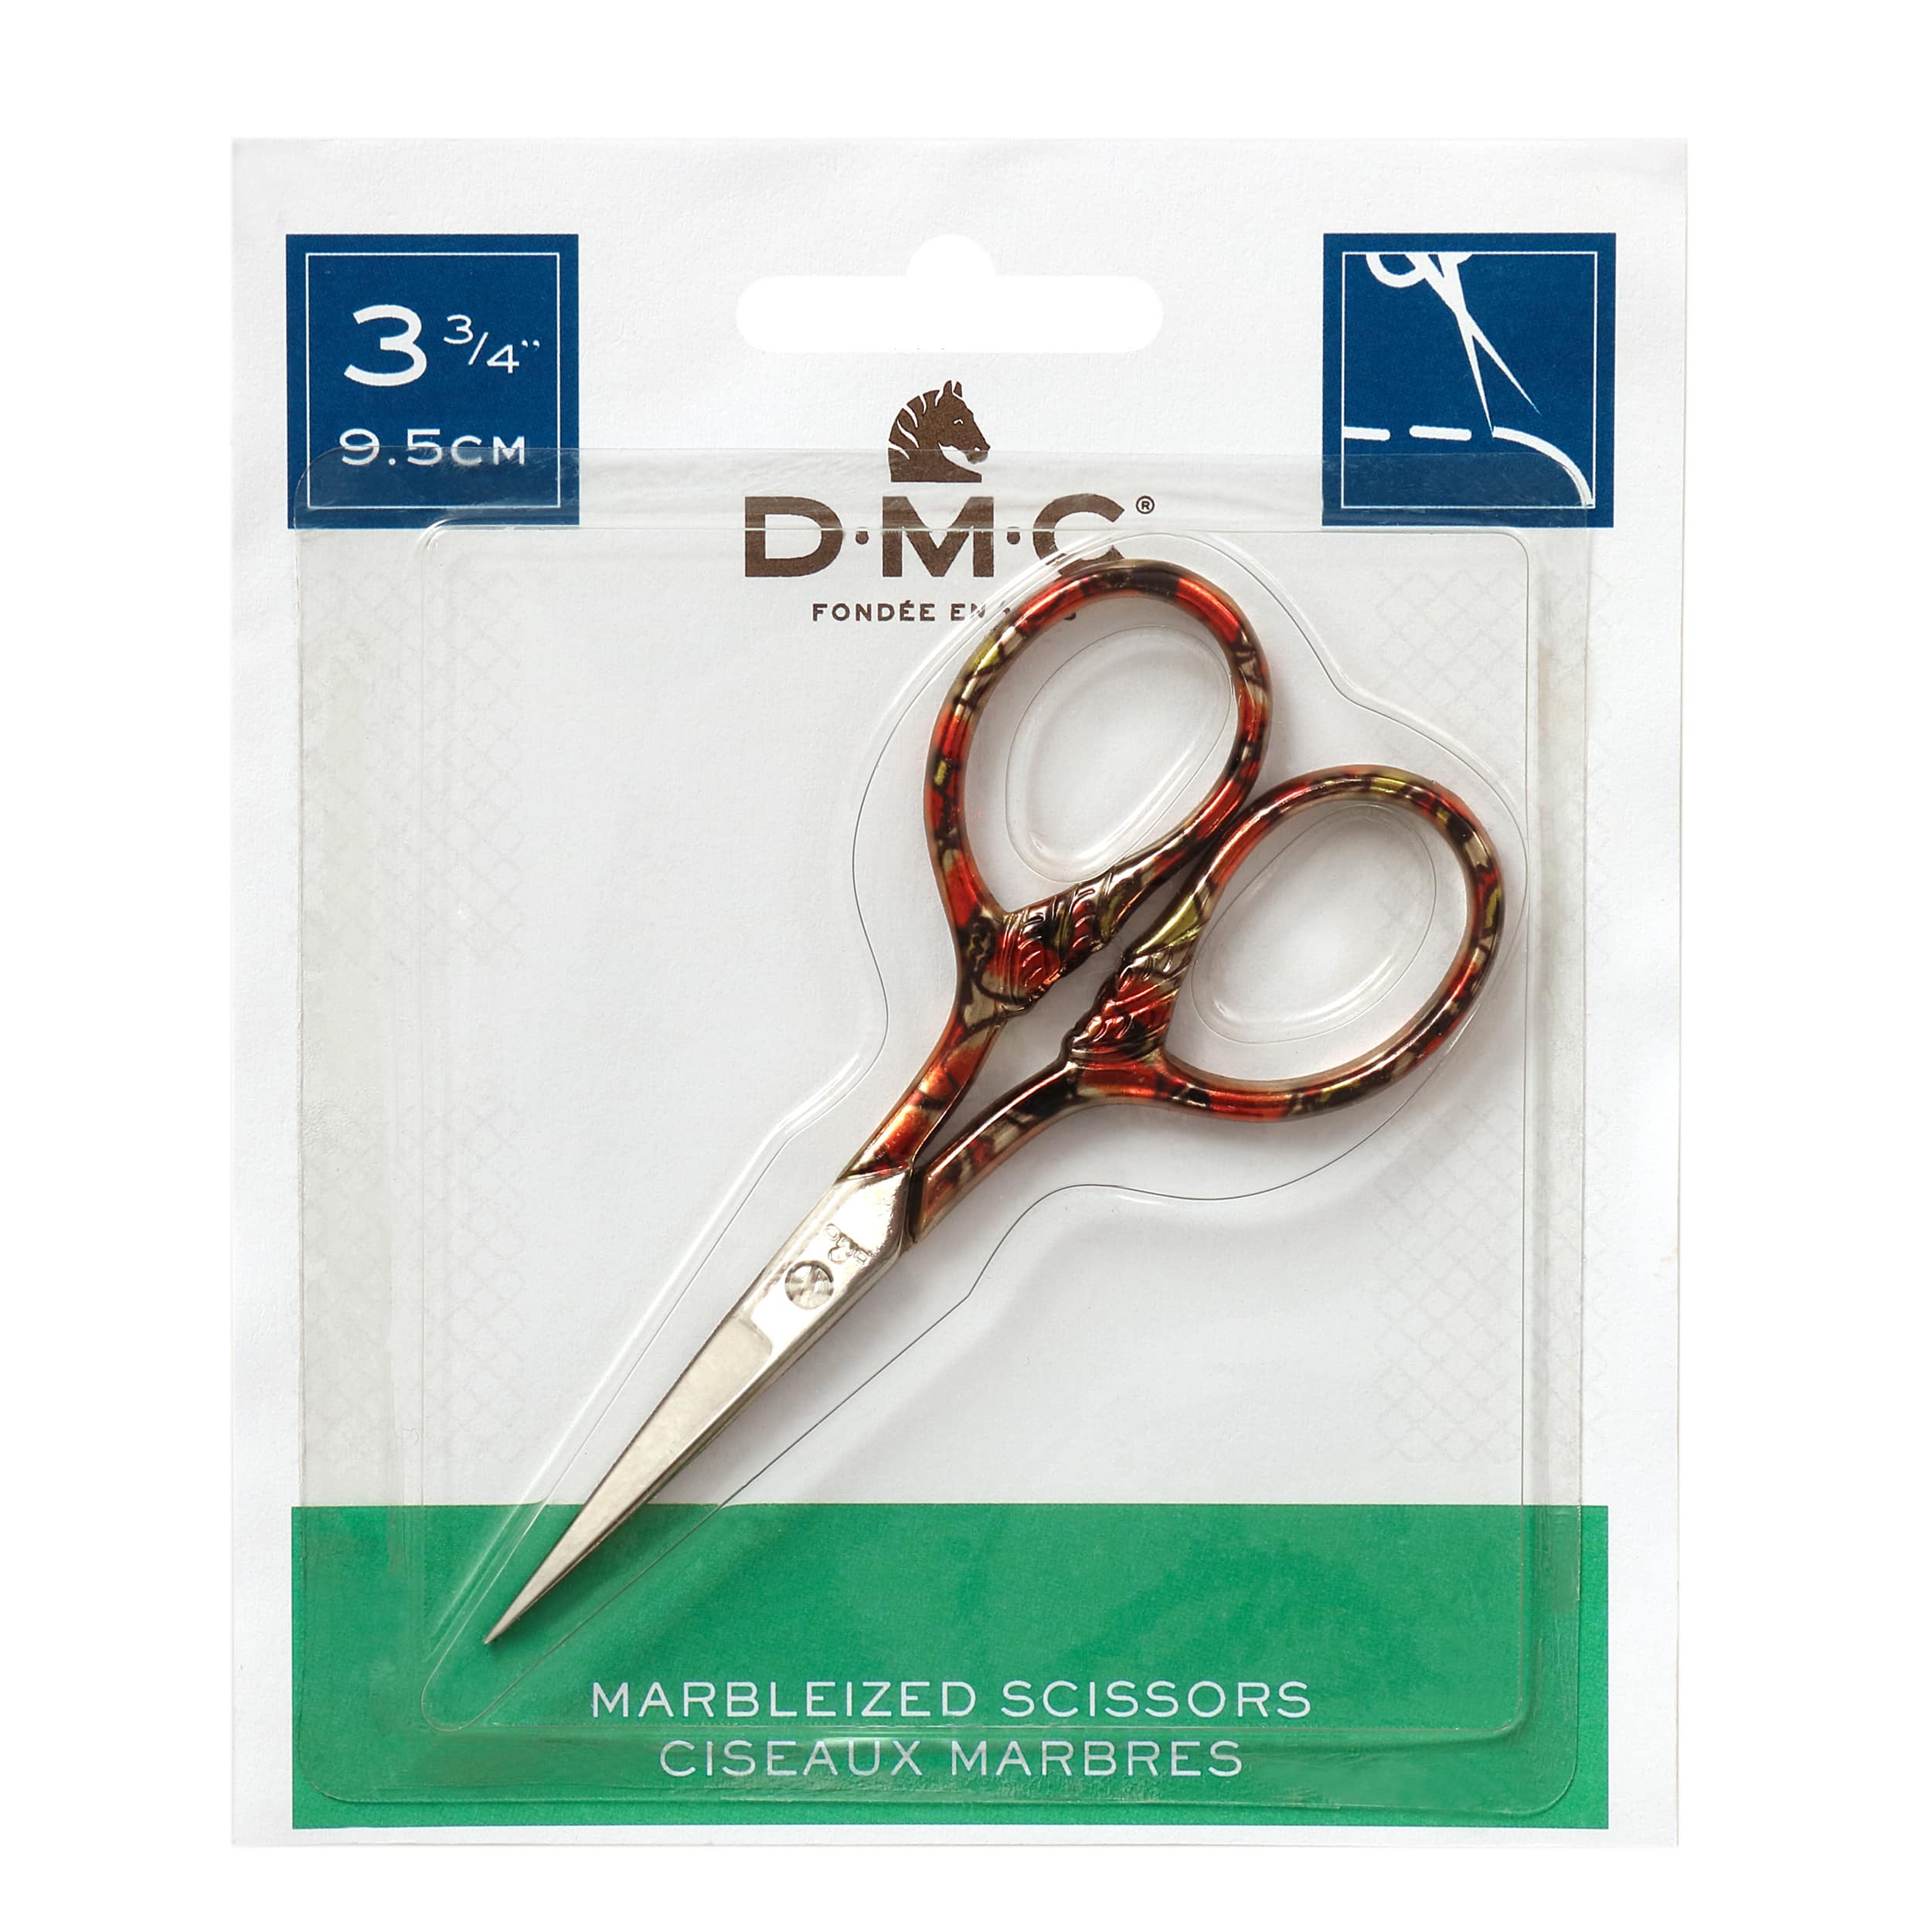 Embroidery Scissors - DMC Peacock Scissors - Sewing Scissors - Embroidery -  Needlepoint - Crewel - 3.75 inch length - Quality Steel Blades